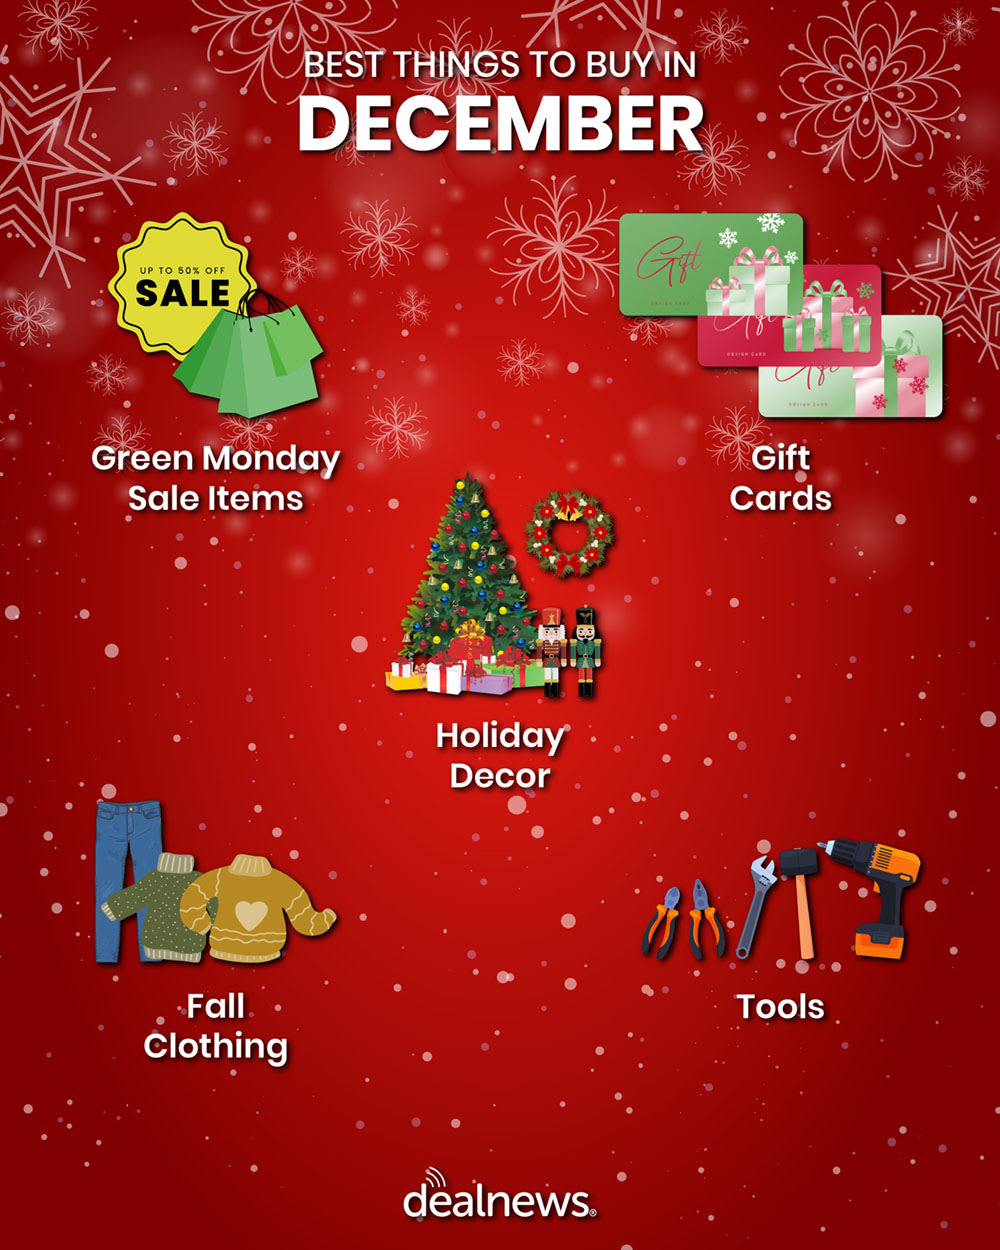 Five of the best things to buy in December shown in infographic.